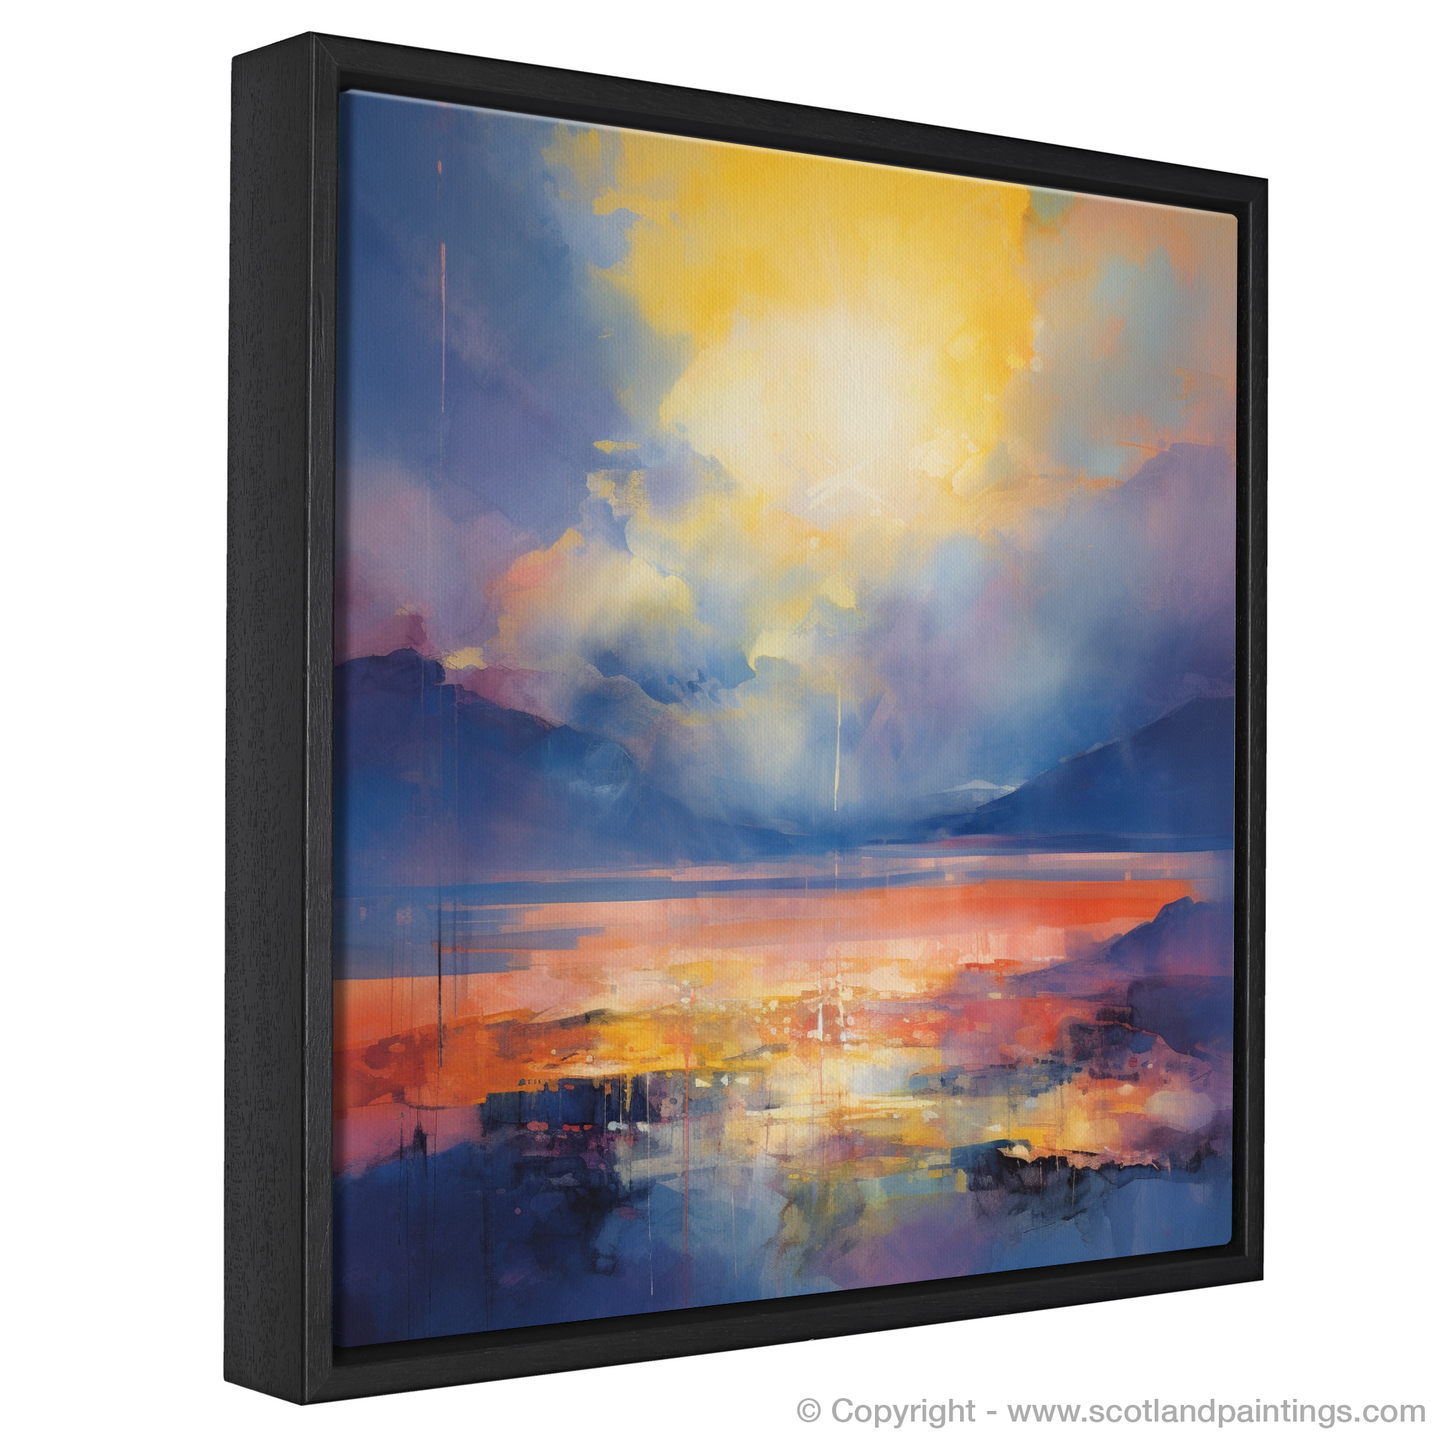 Painting and Art Print of Crepuscular rays above Loch Lomond. Crepuscular Radiance over Loch Lomond.